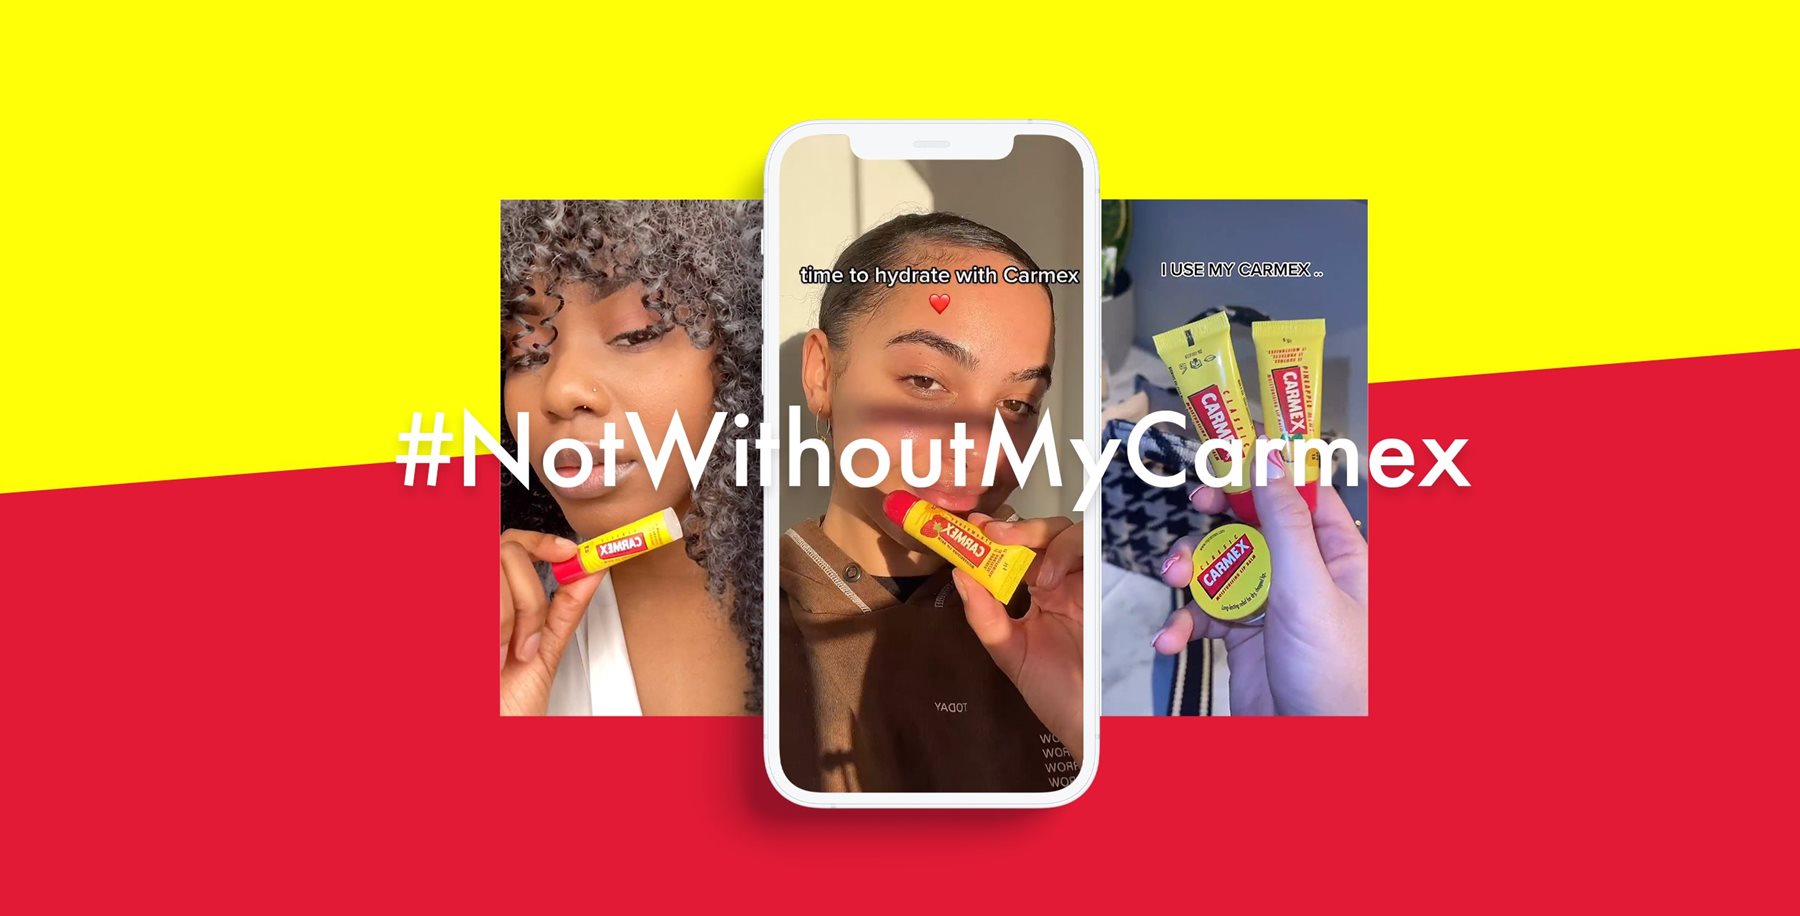 Three phones against a red and yellow background with the hacktag 'Not without my Carmex' running across them